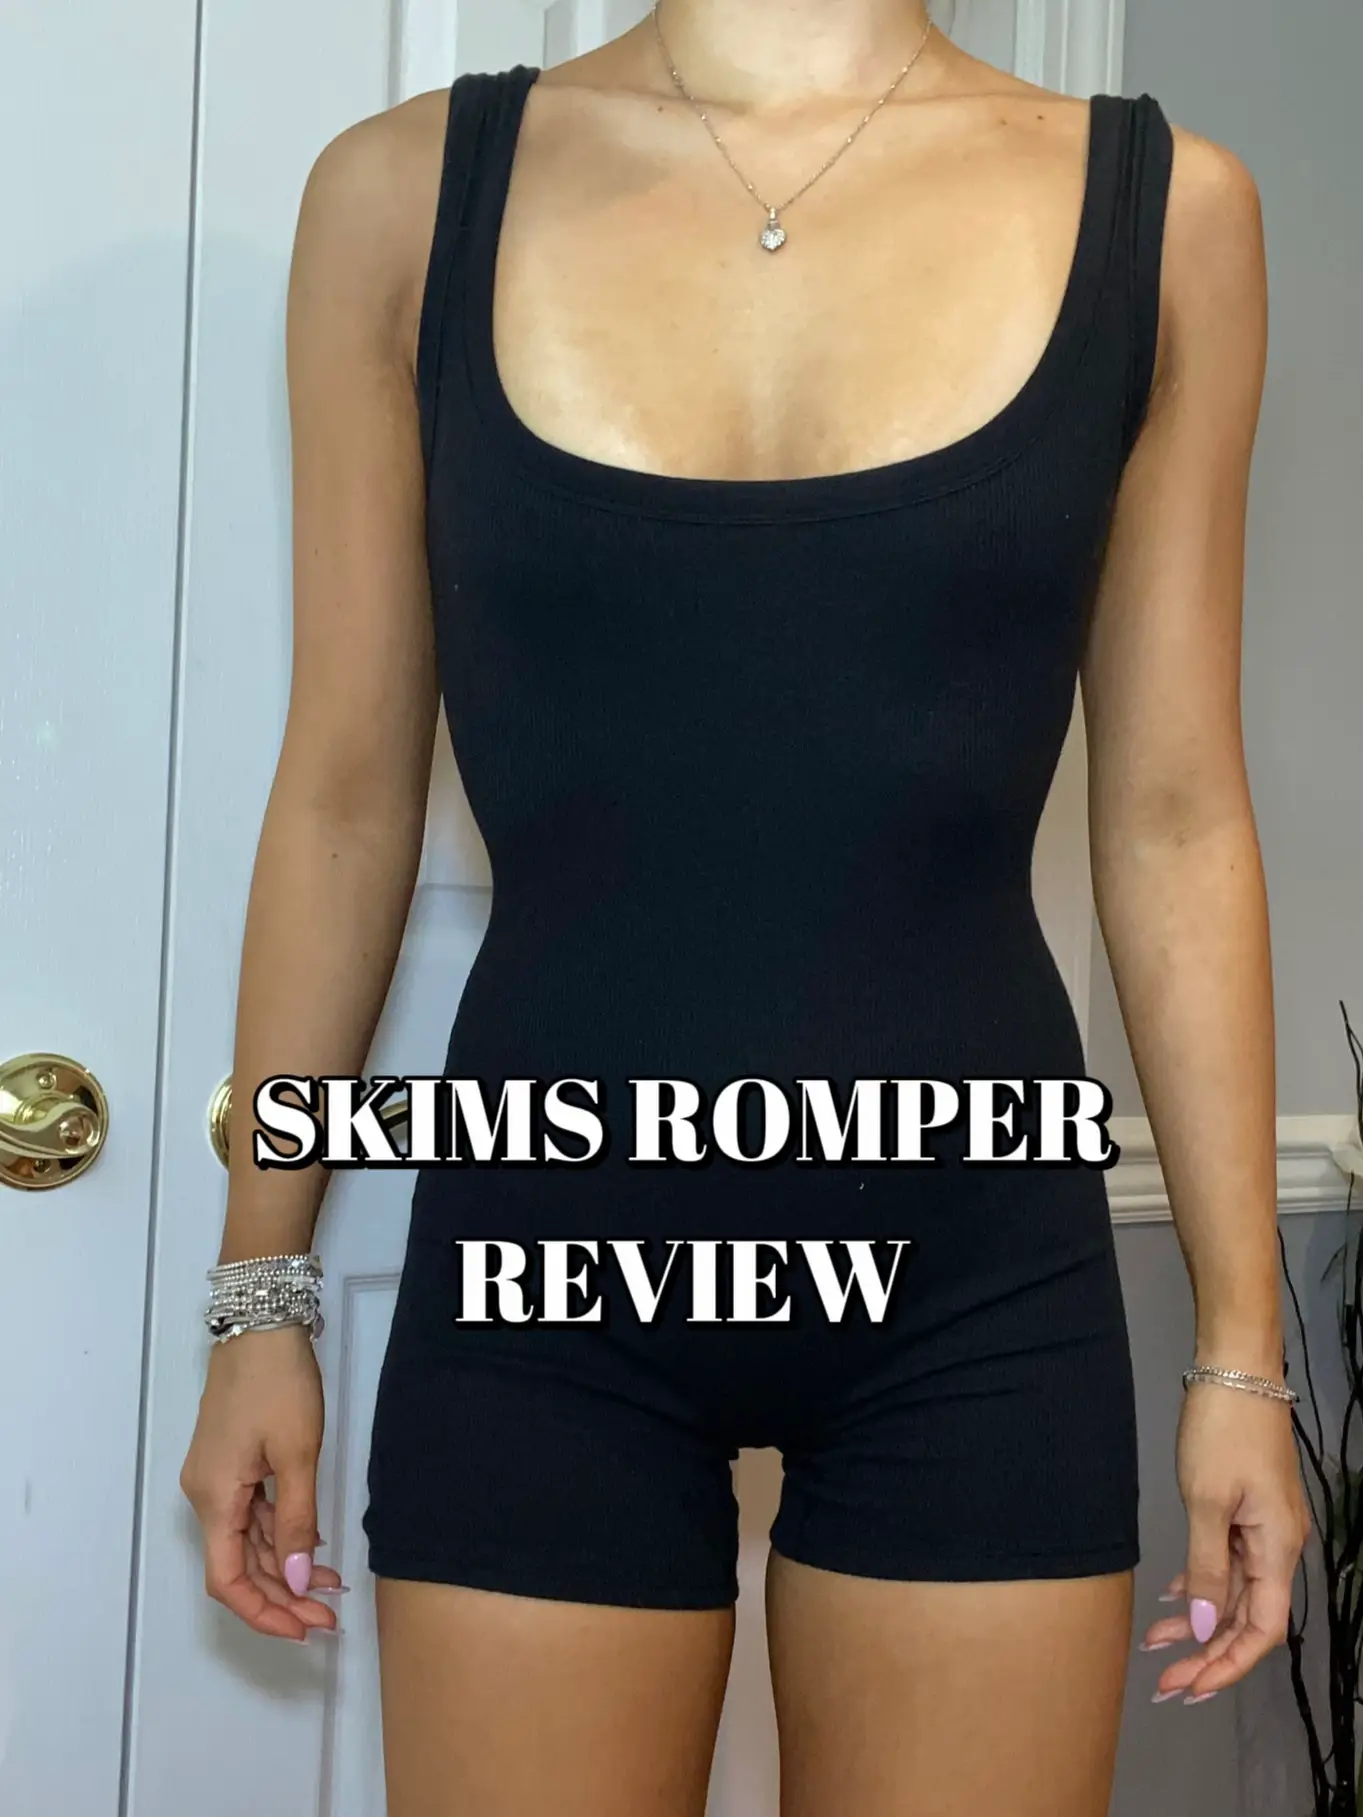 Skims Romper Review, Gallery posted by Lexirosenstein